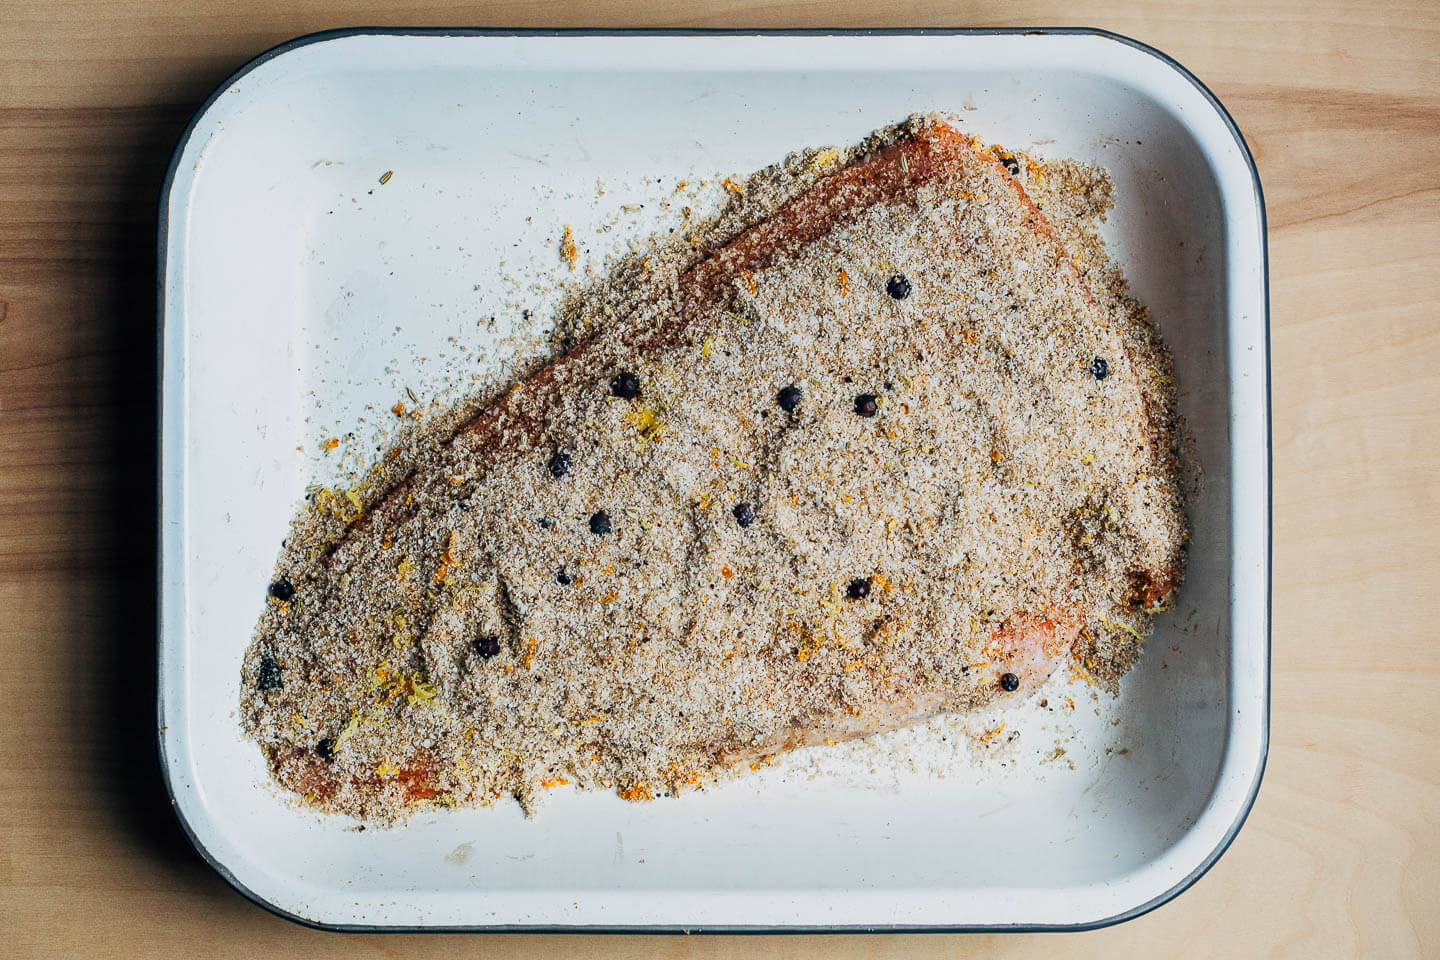 A salmon filet coated with a salt, sugar, and spice mixture for curing.